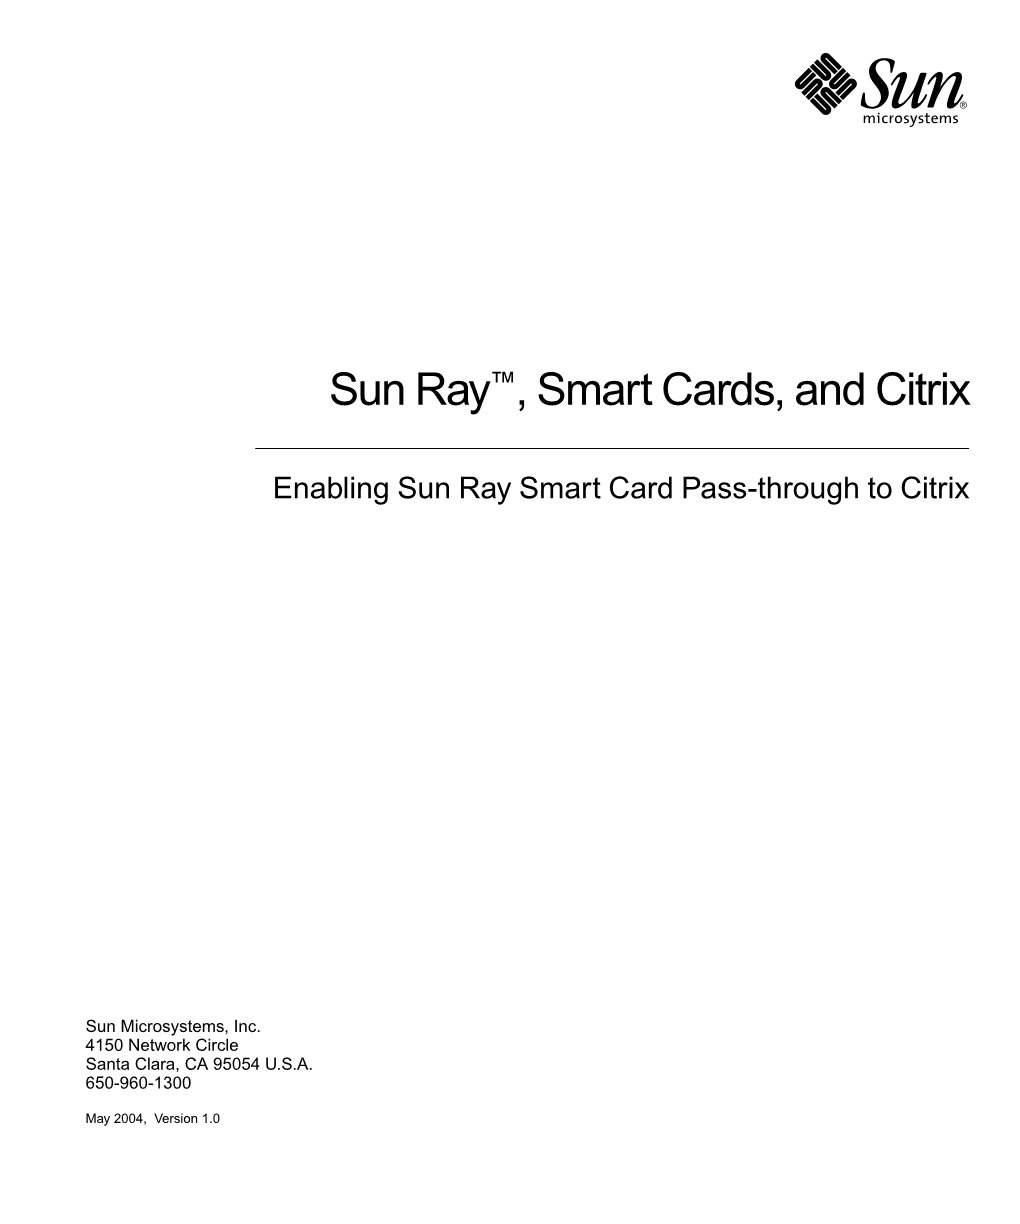 Sun Ray, Smart Cards, and Citrix